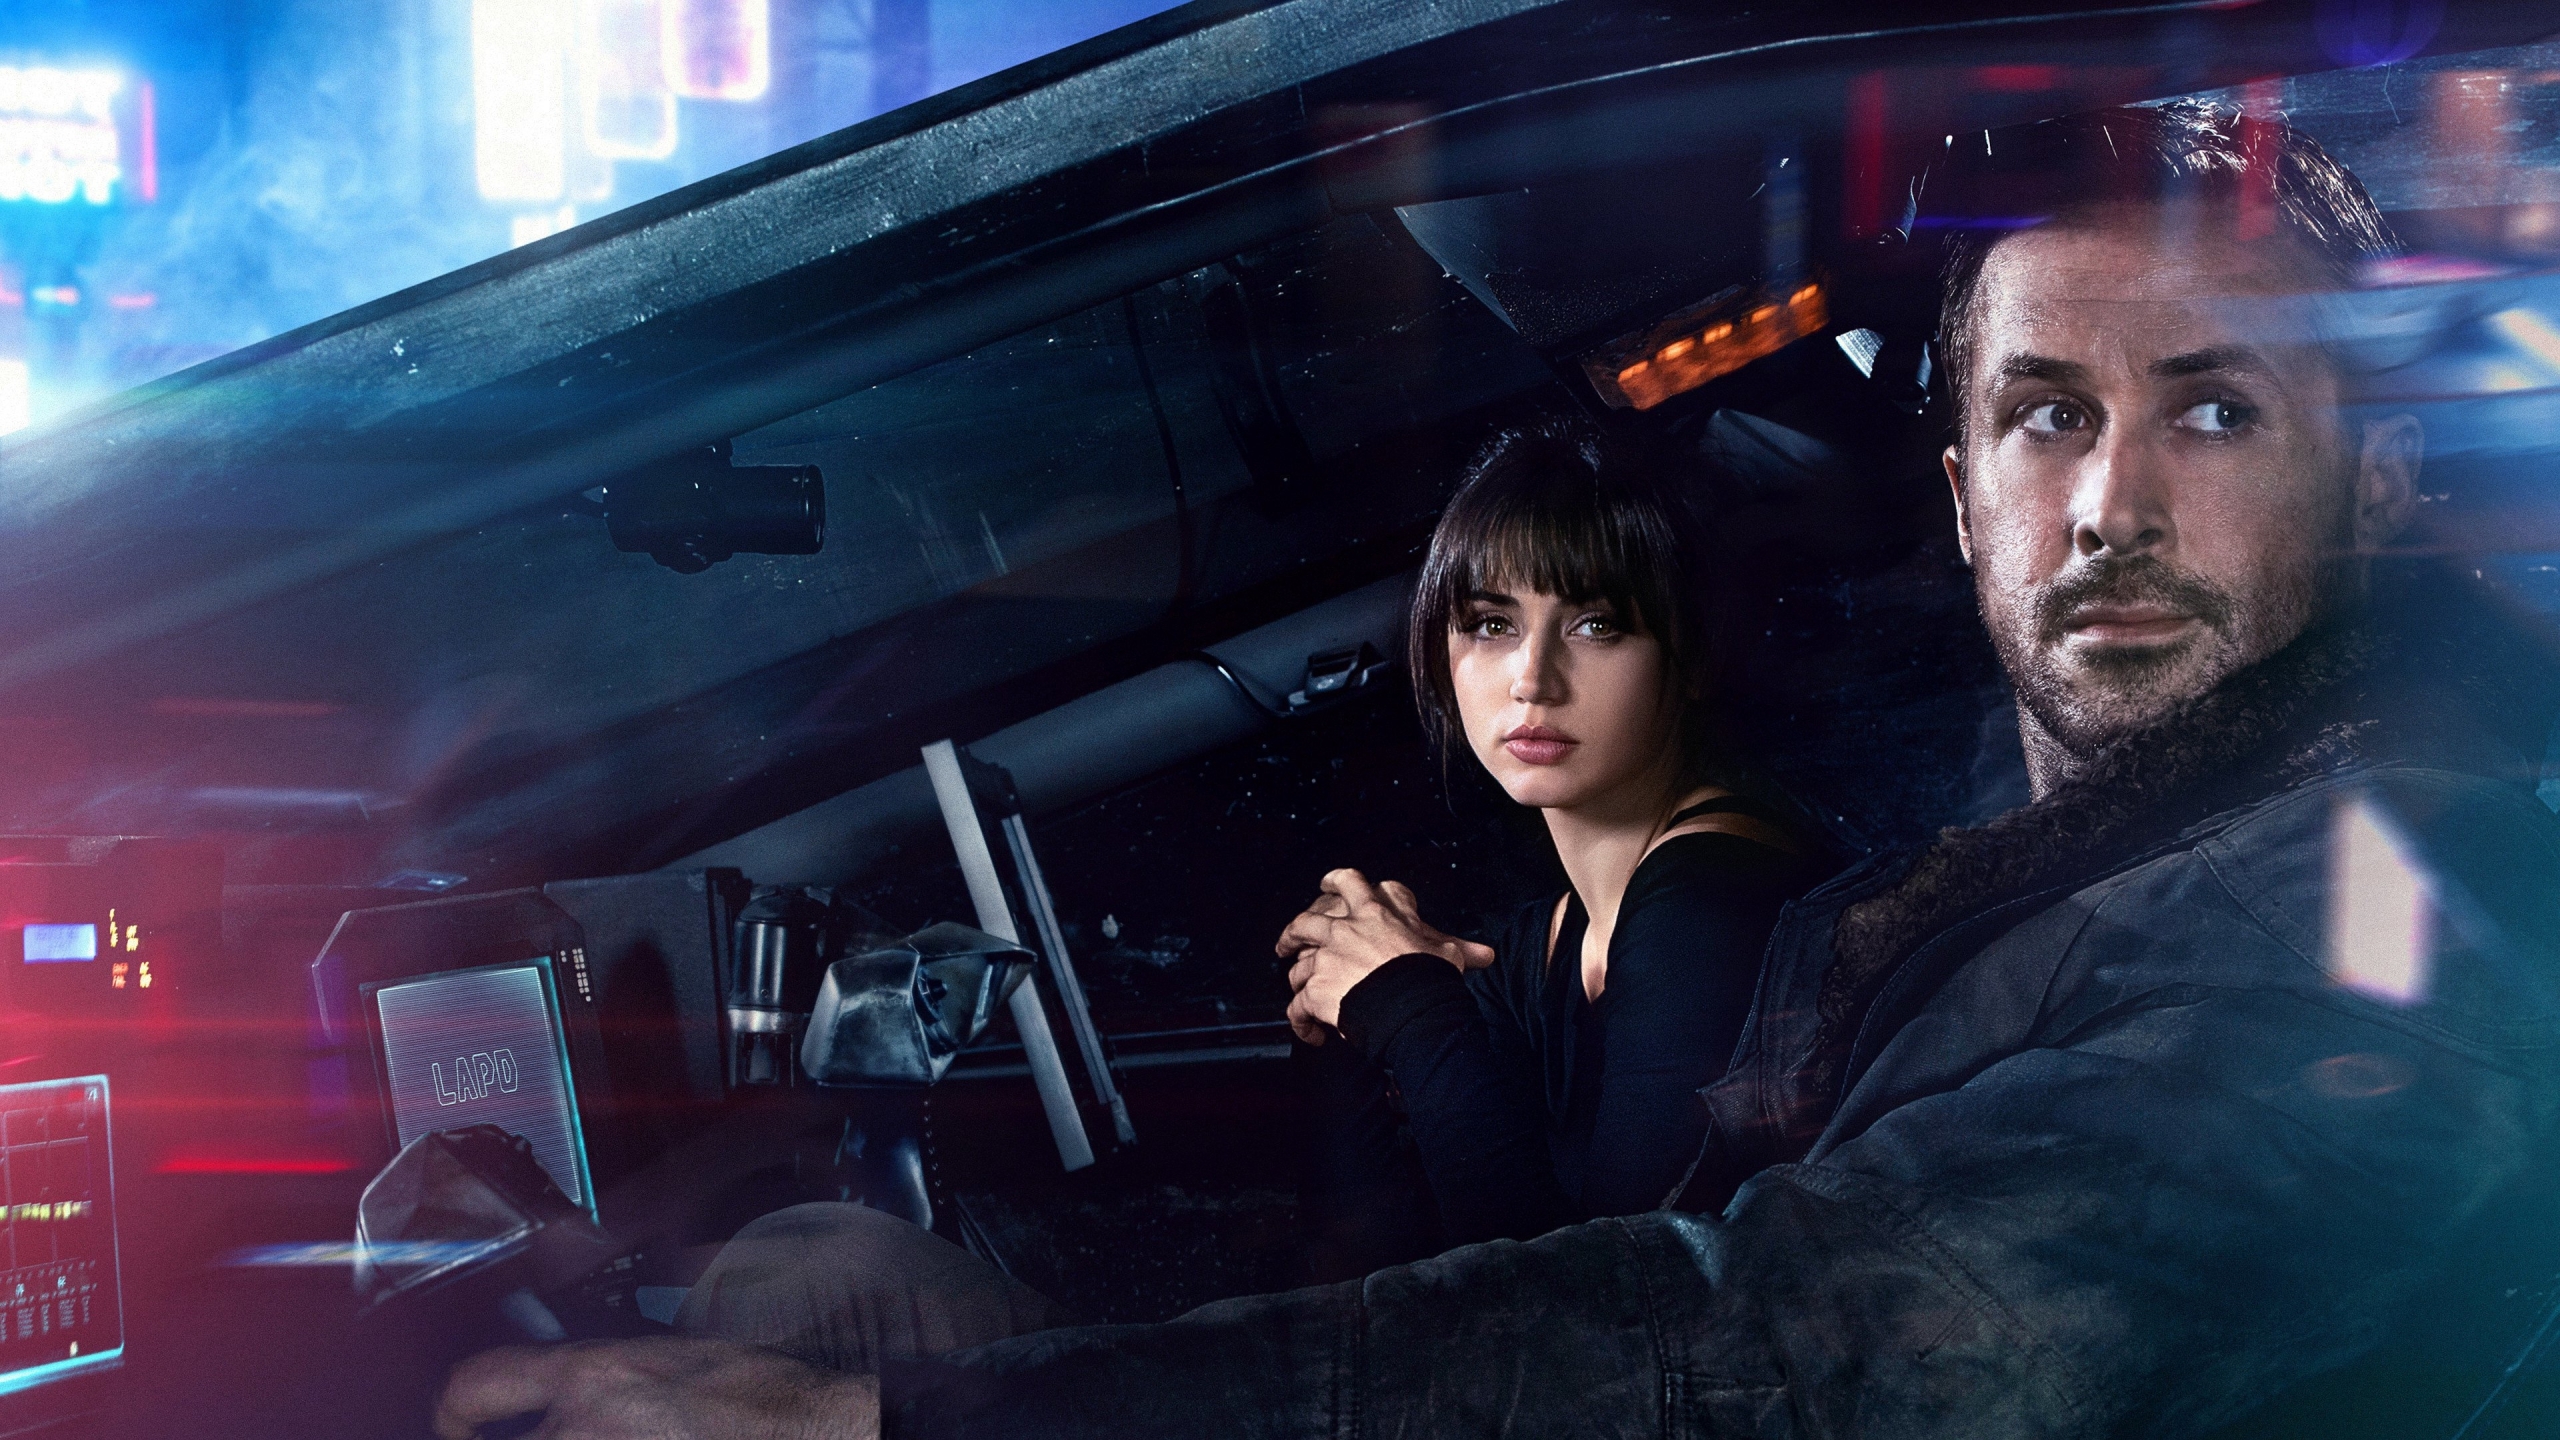 2560x1440 Blade Runner 49 Ana De Armas Ryan Gosling 1440p Resolution Wallpaper Hd Movies 4k Wallpapers Images Photos And Background